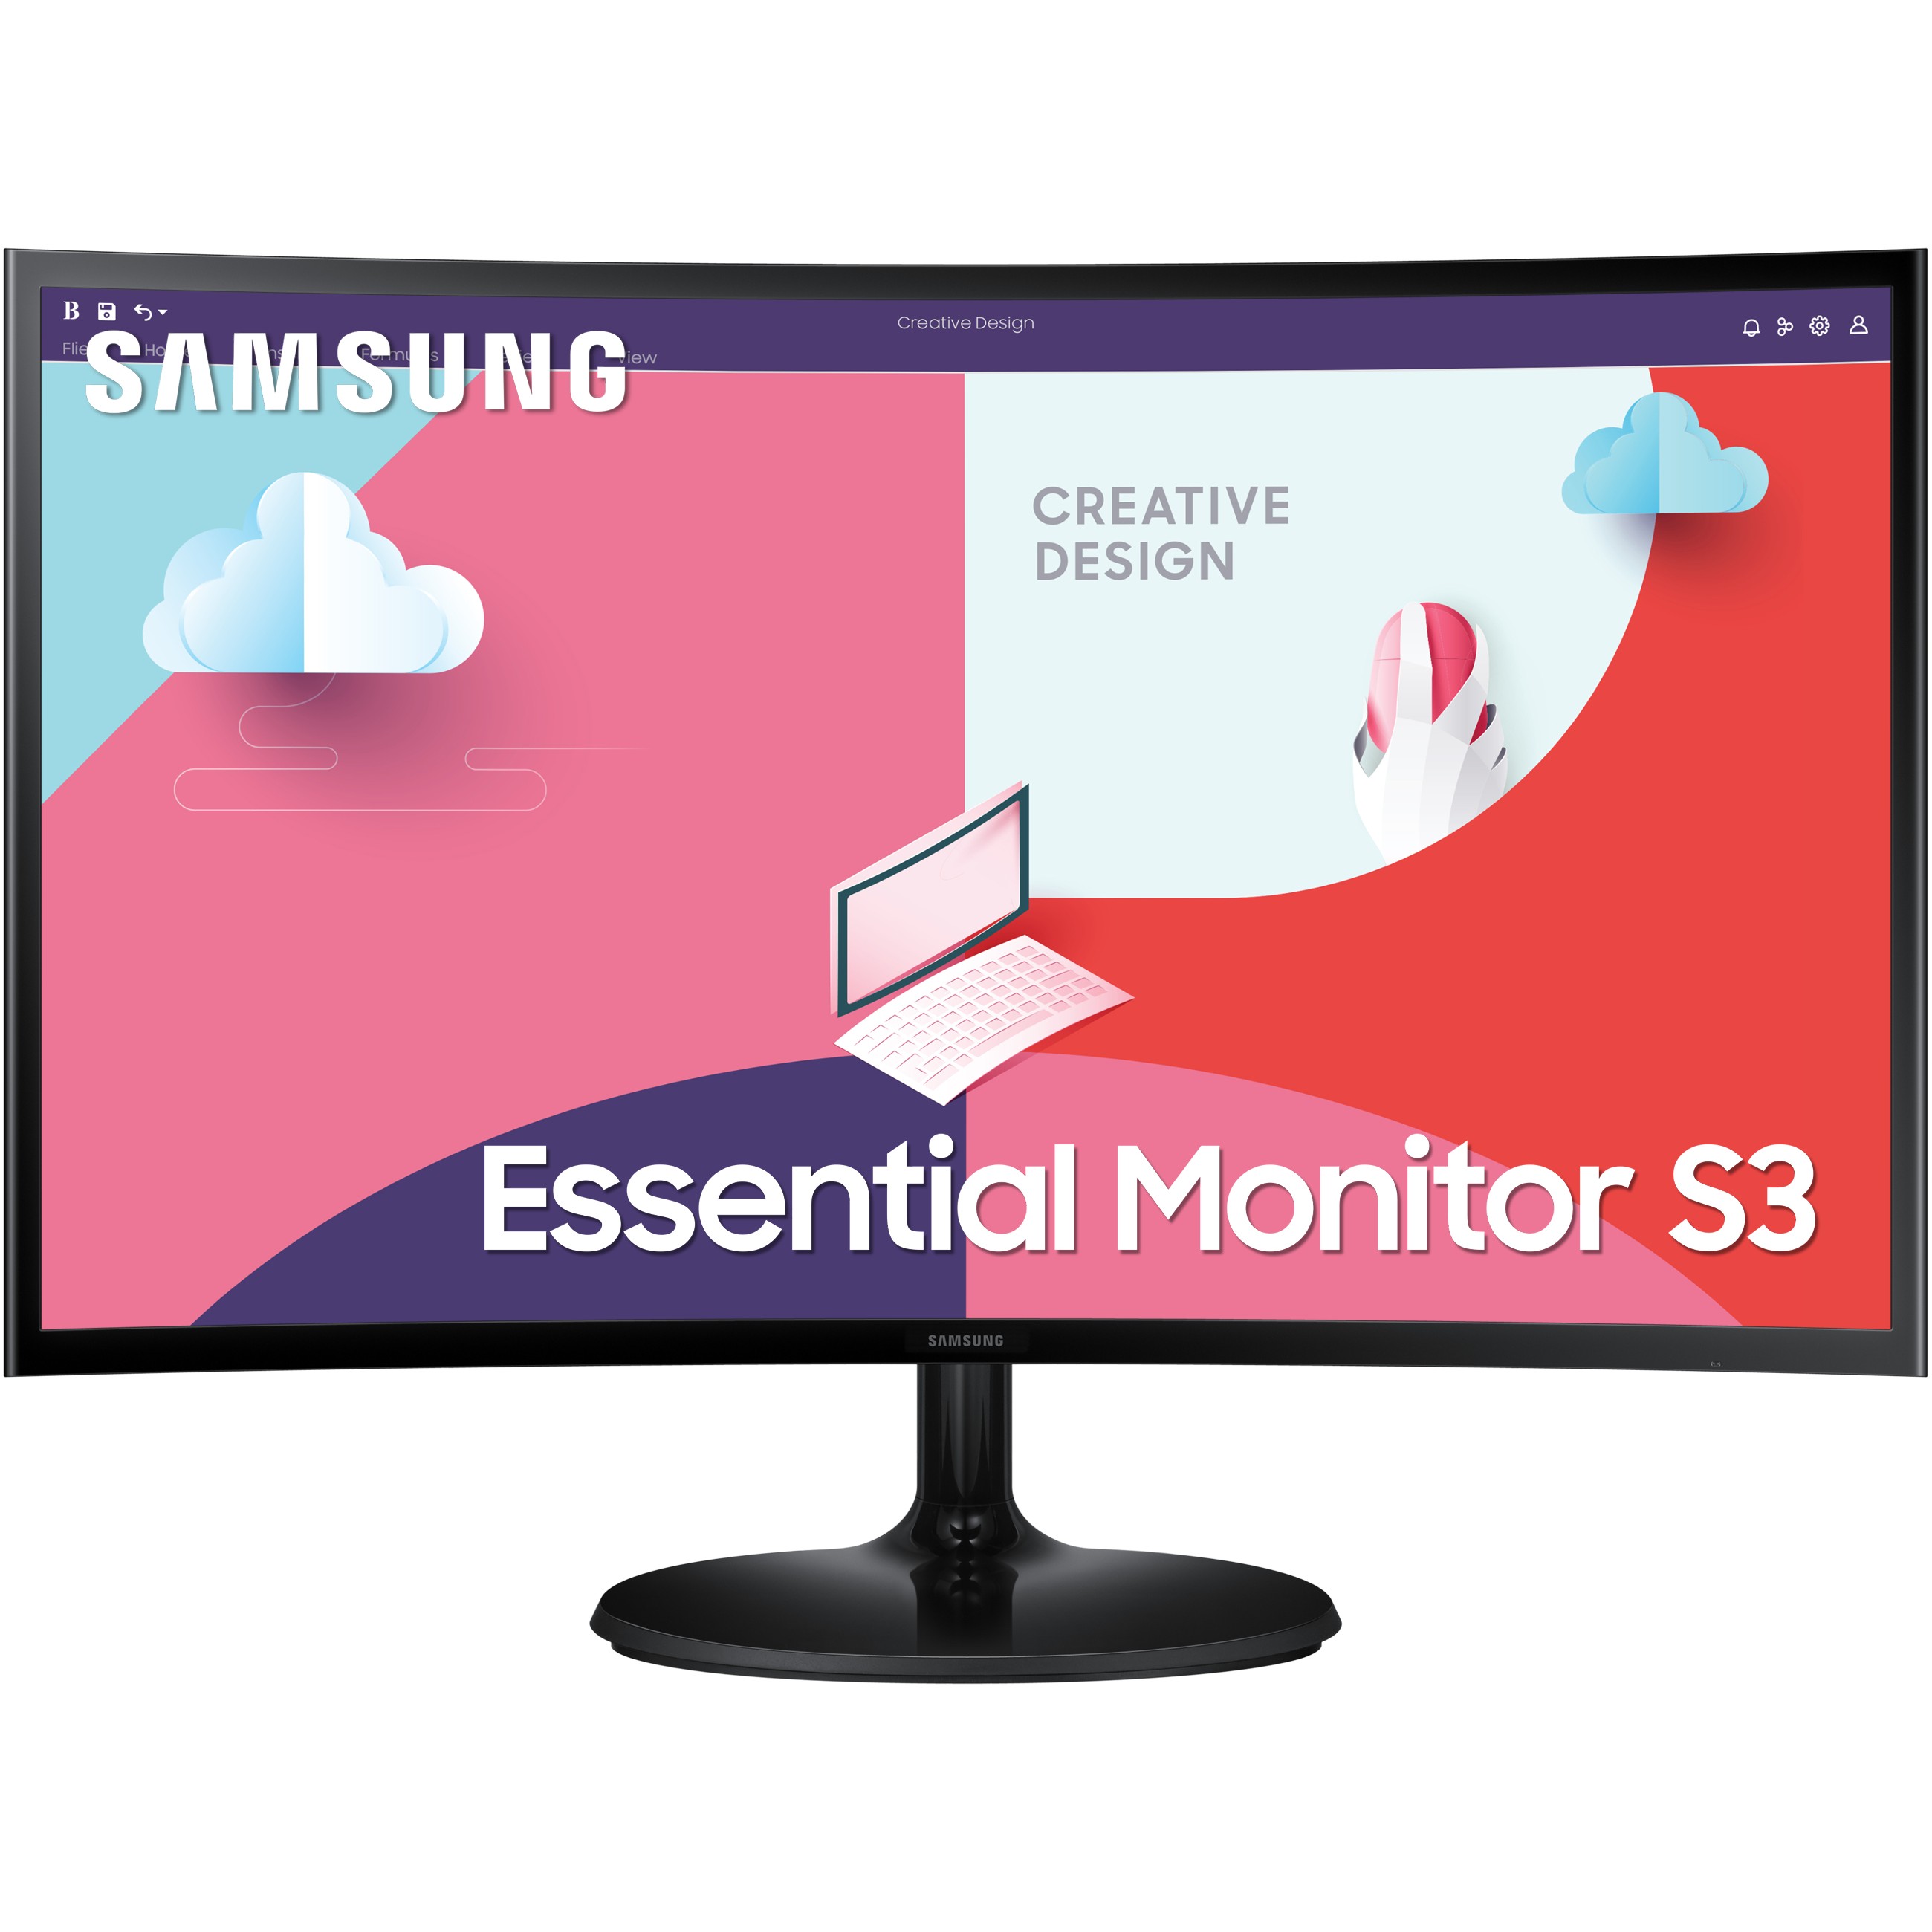 Samsung Essential Monitor S3 S36C LED display